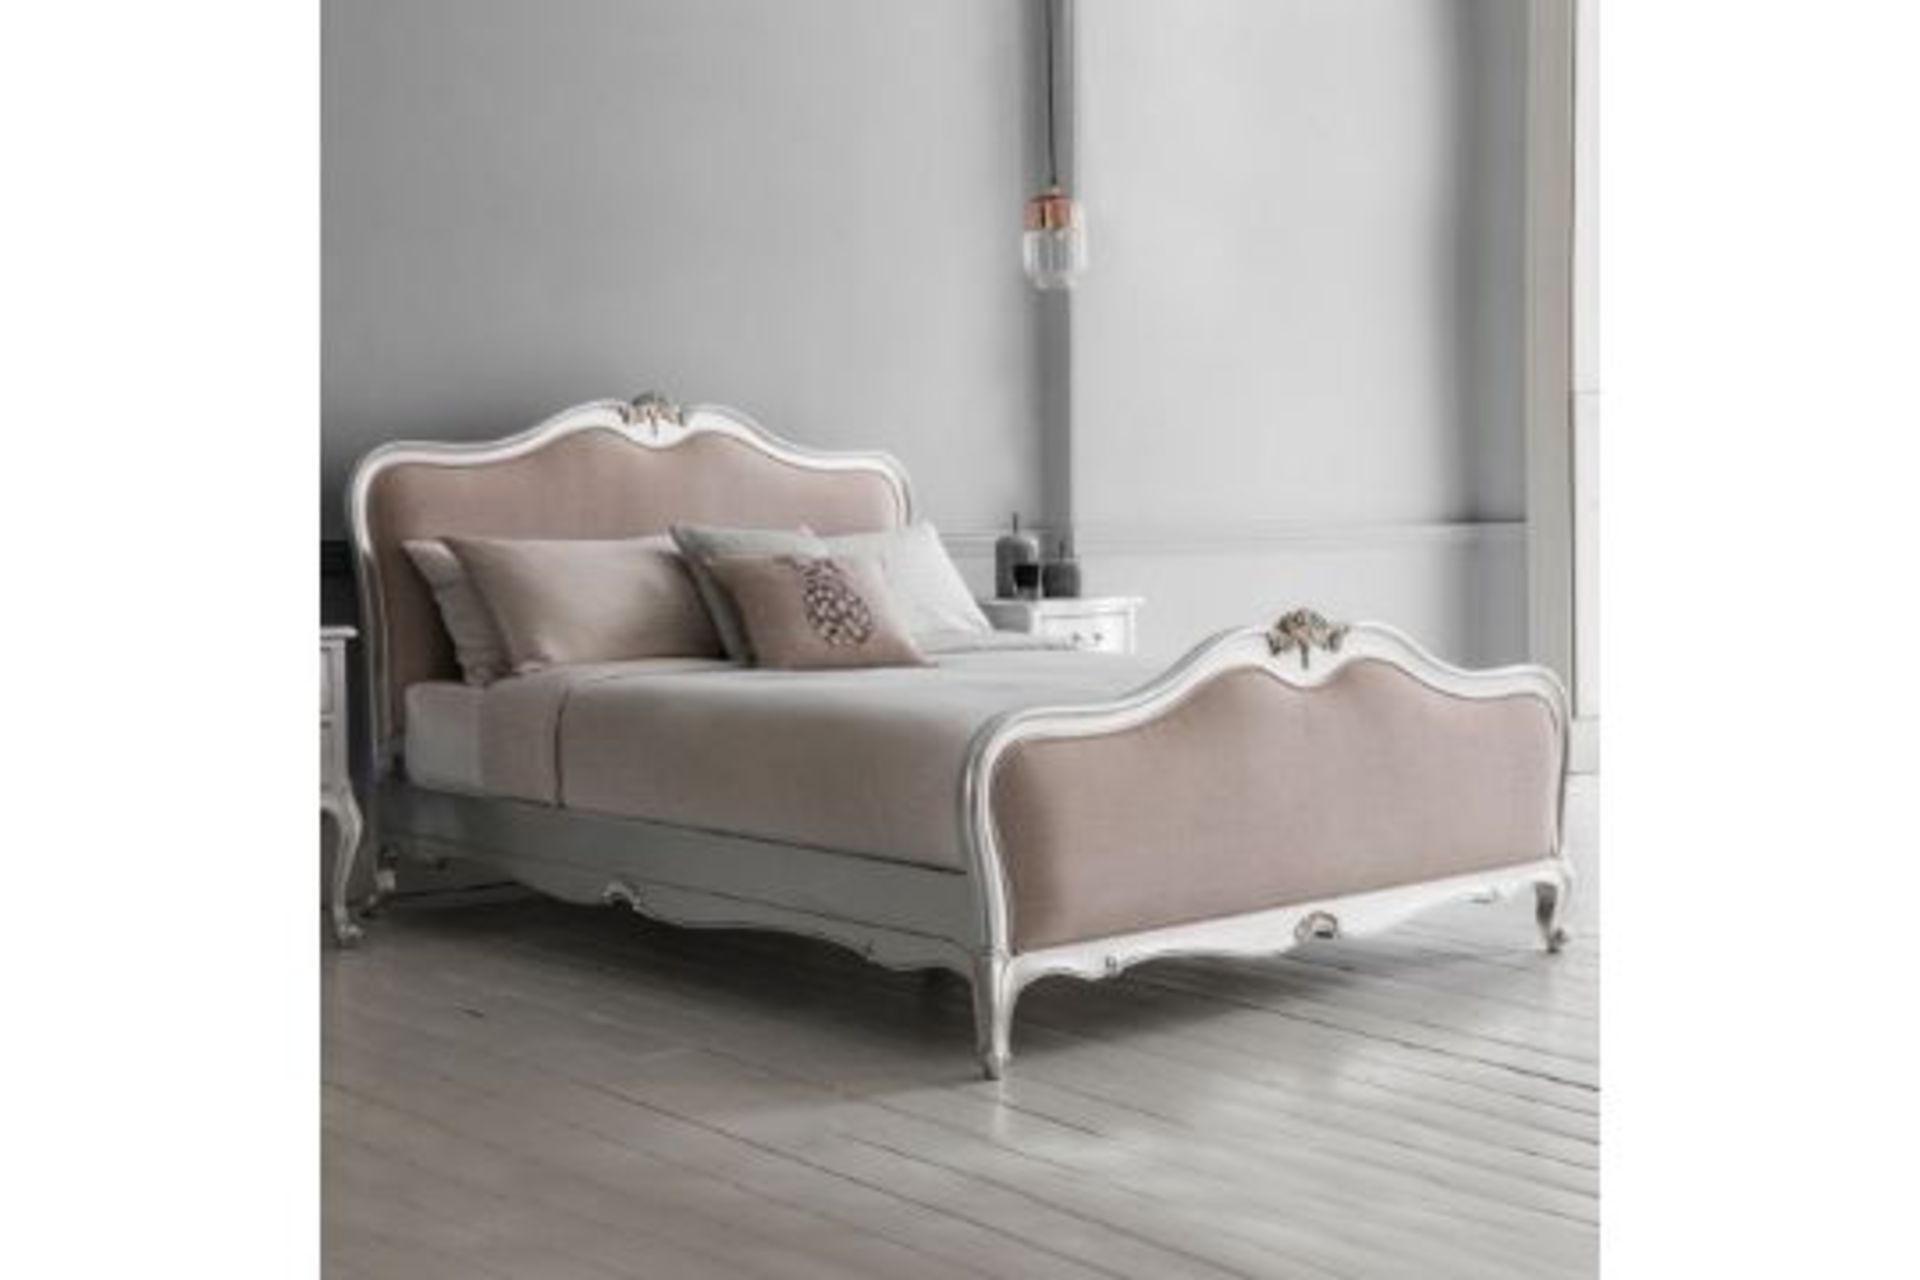 Hudson Chic 6' Superking Linen Upholstered Bed Silver Handcrafted With Exquisite Attention To Detail